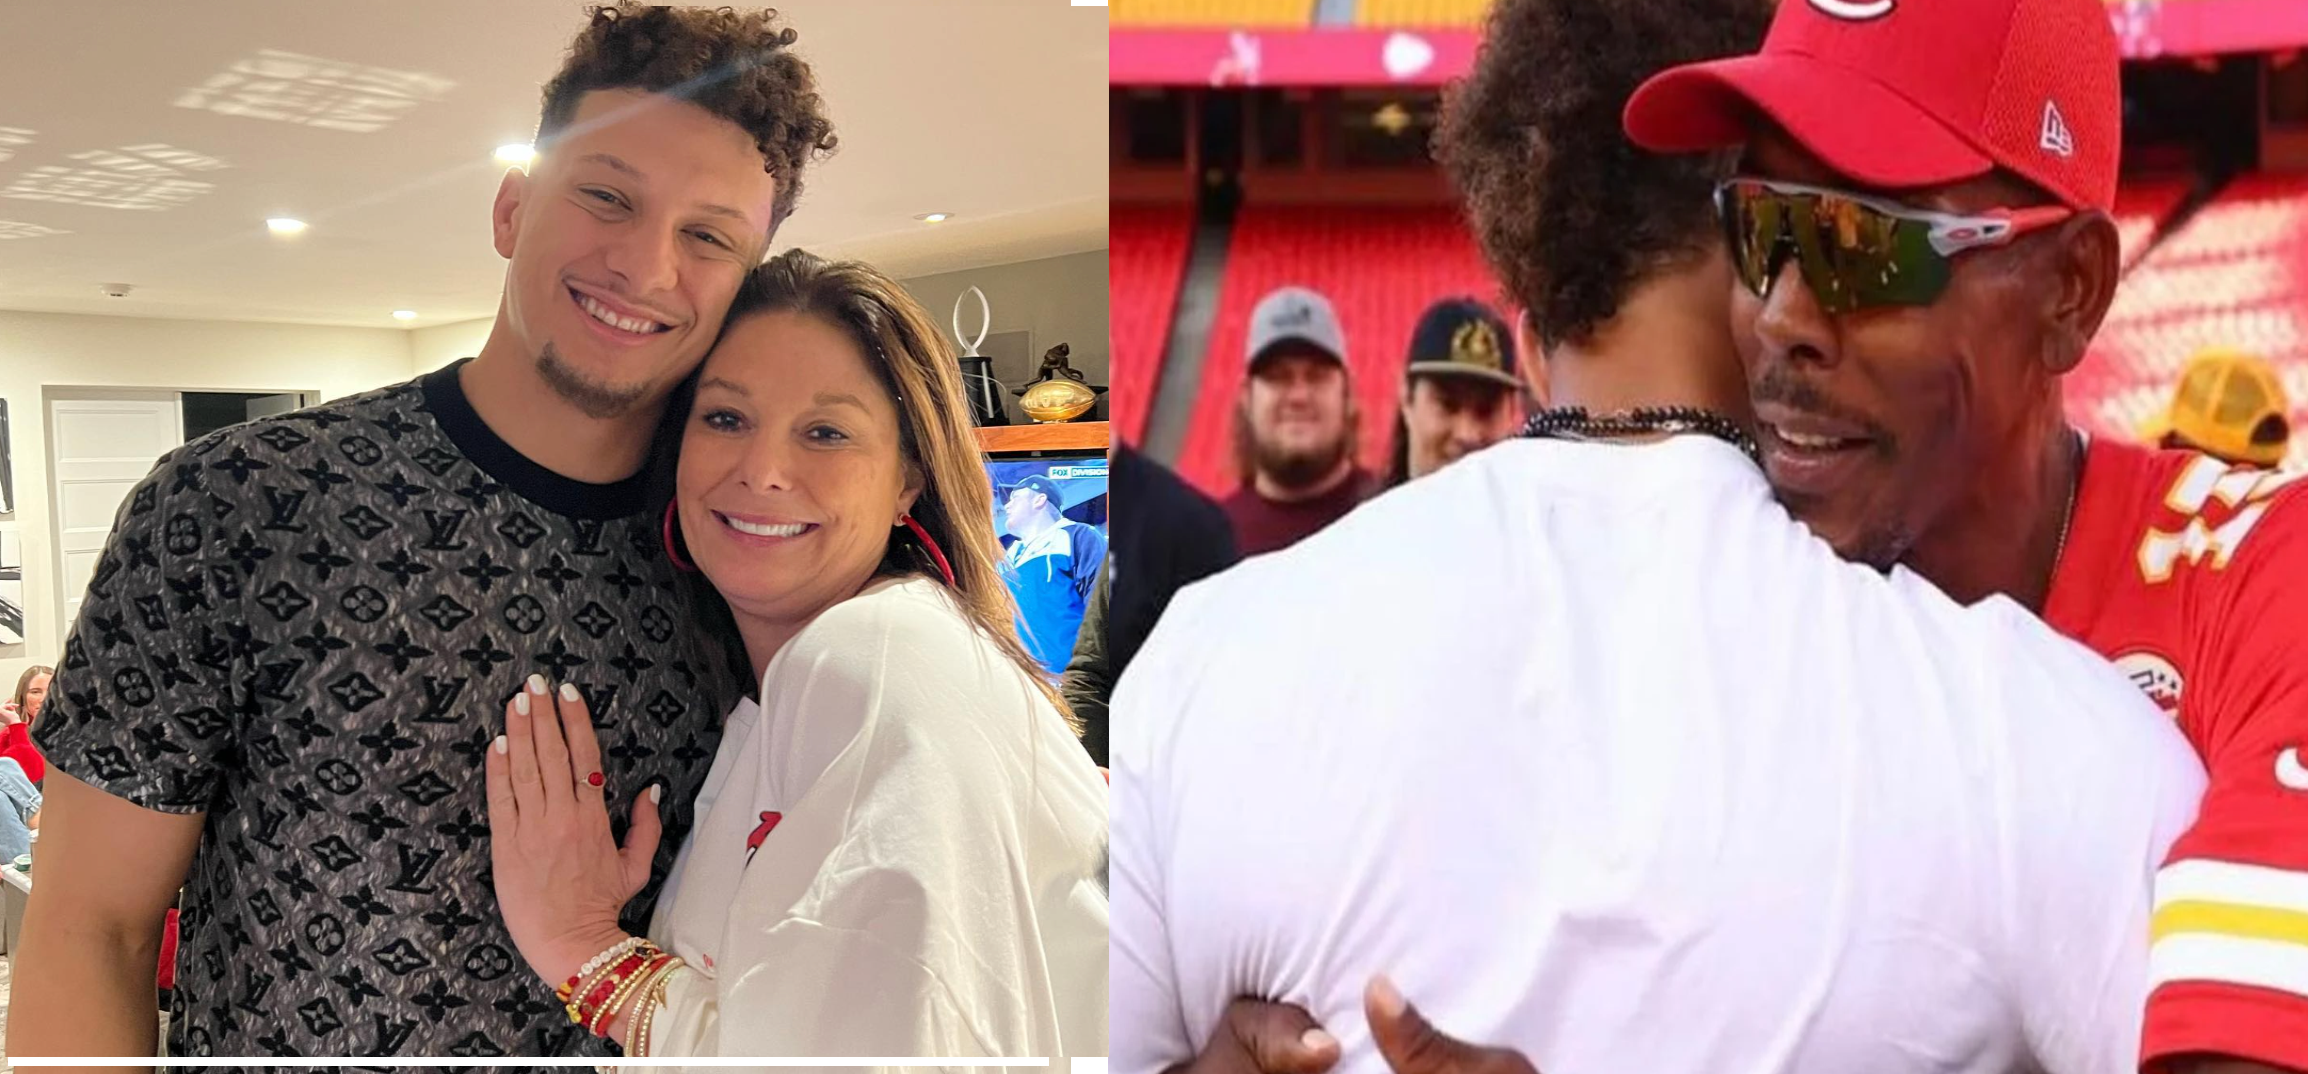 "After 18 years, it's heartwarming to witness Mom and Dad back together," Patrick Mahomes expresses his uncontainable joy as his parents reconcile following nearly two decades of divorce.